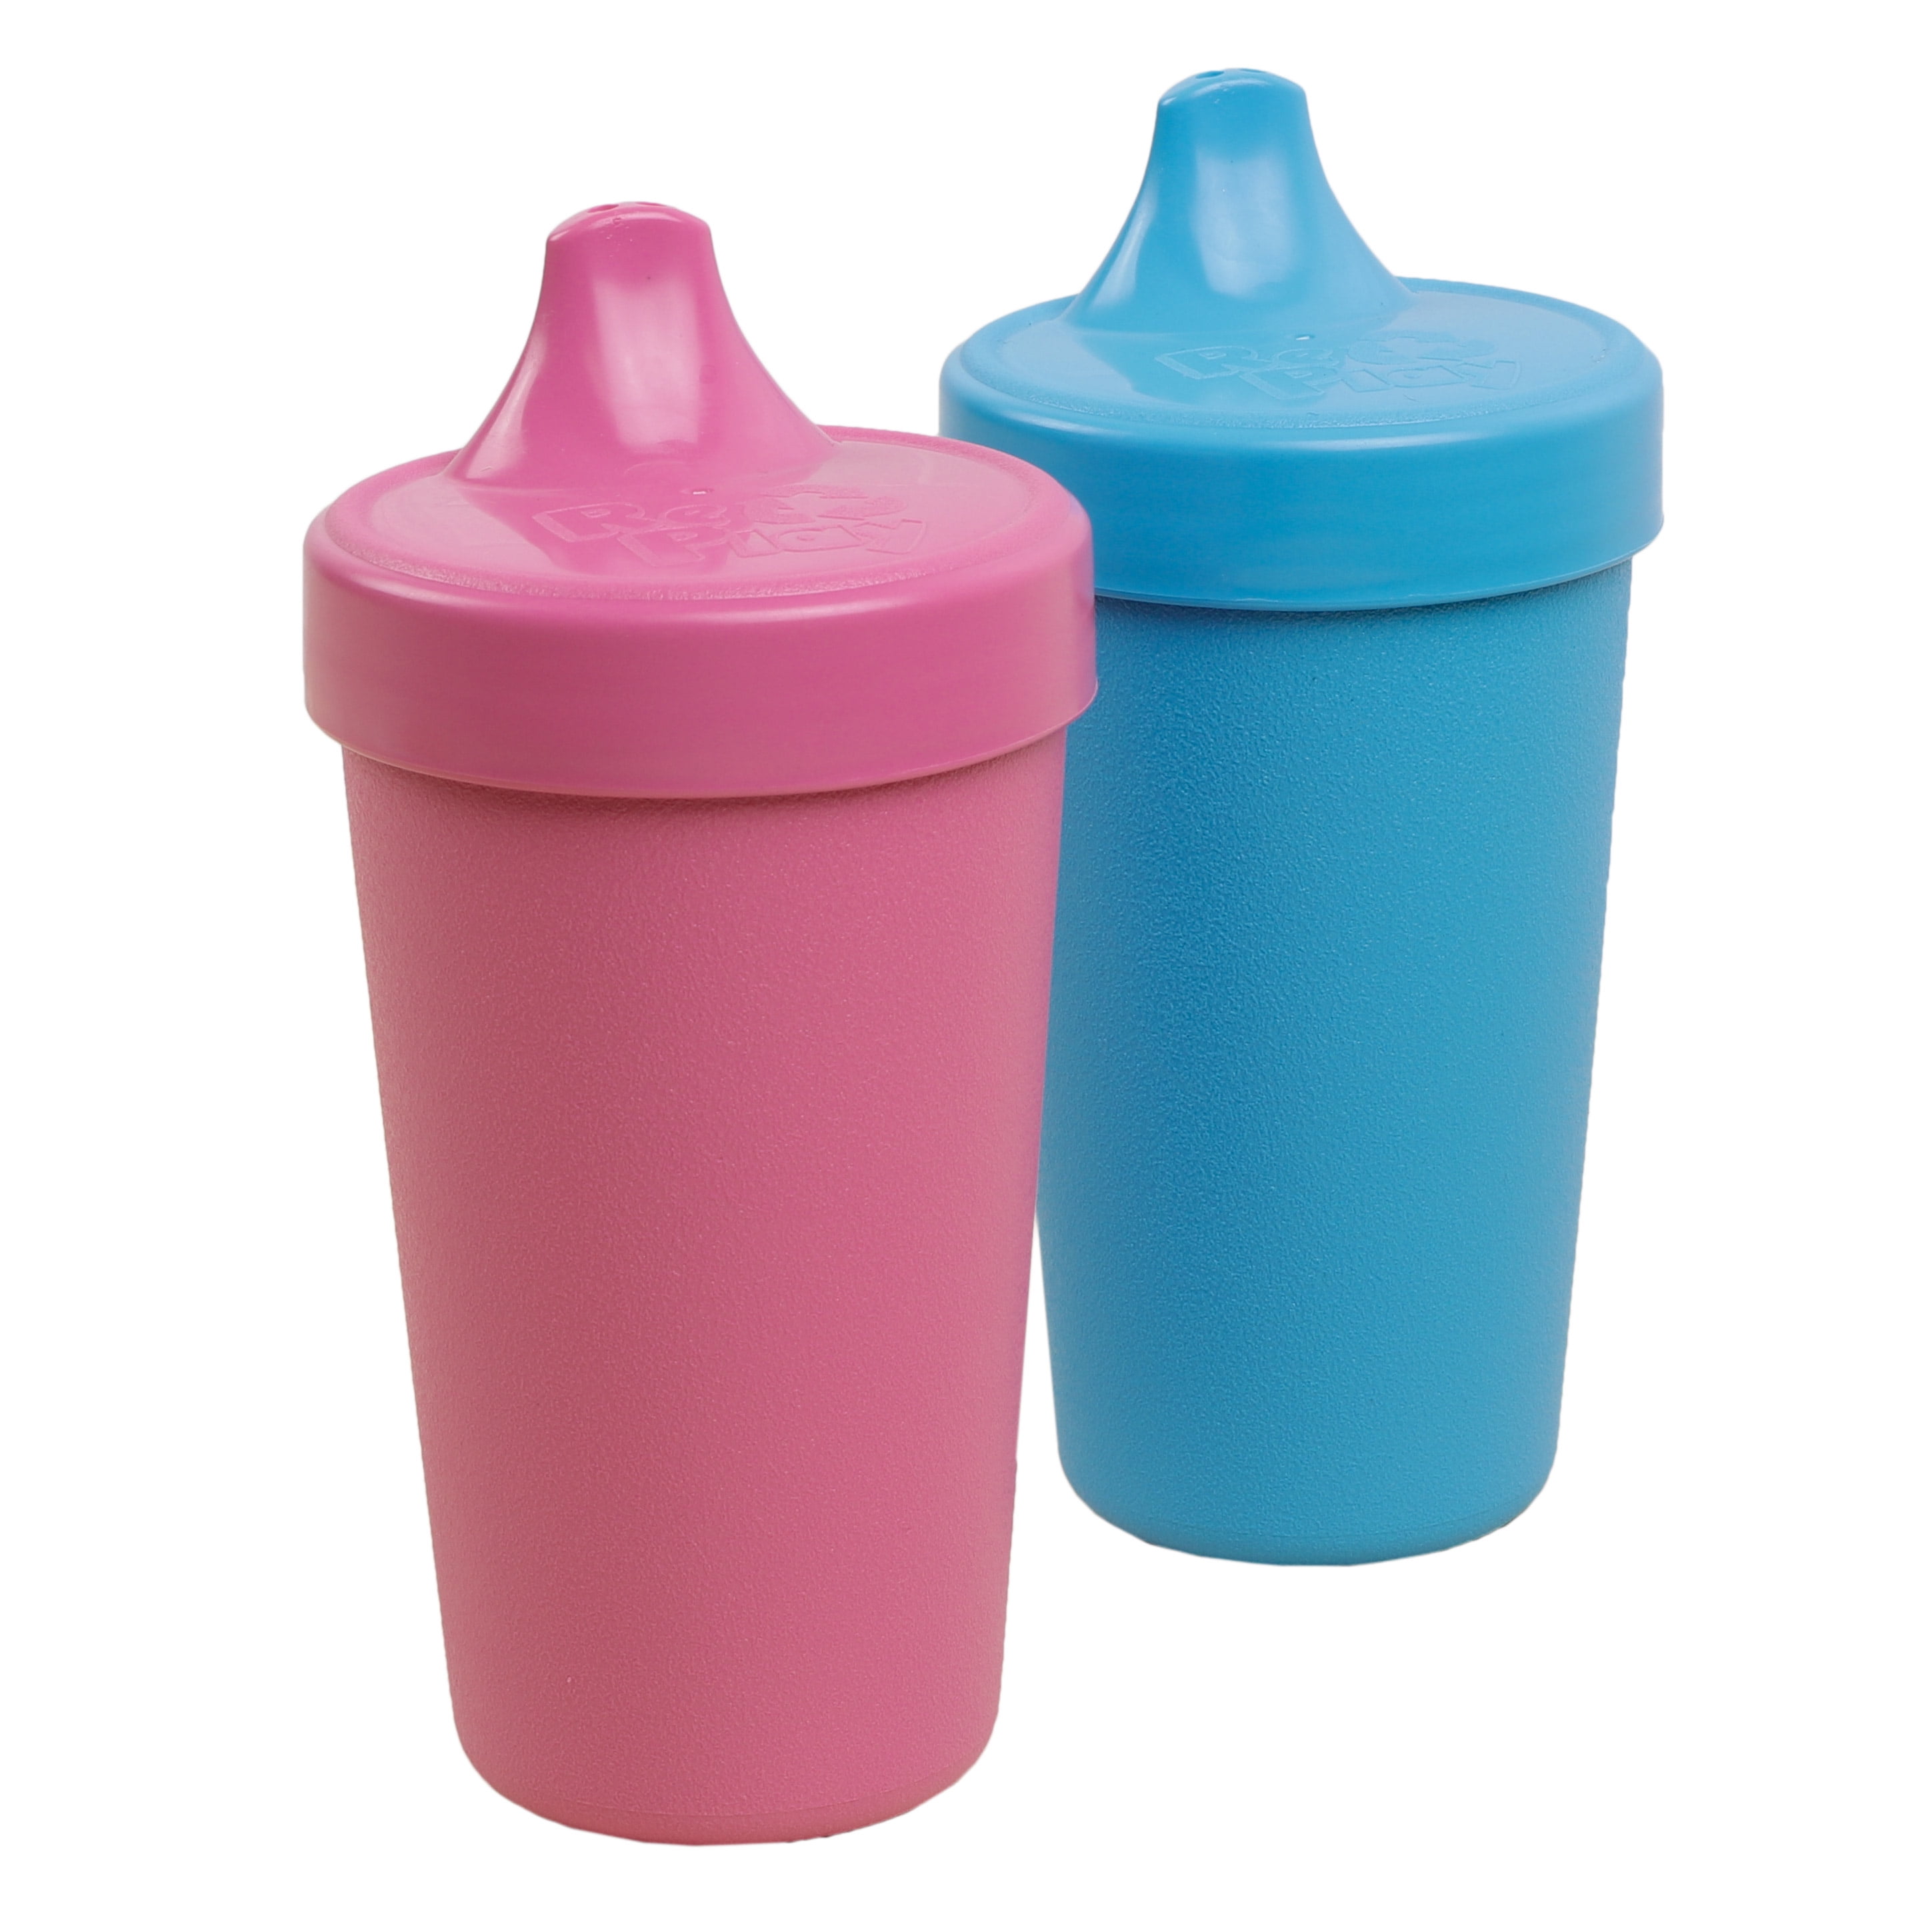 Re-Play Made in The USA 3pk Toddler Feeding No Spill Sippy Cups for Baby,  Toddler, and Child Feeding - Red, Yellow, Sky Blue (Primary) Durable